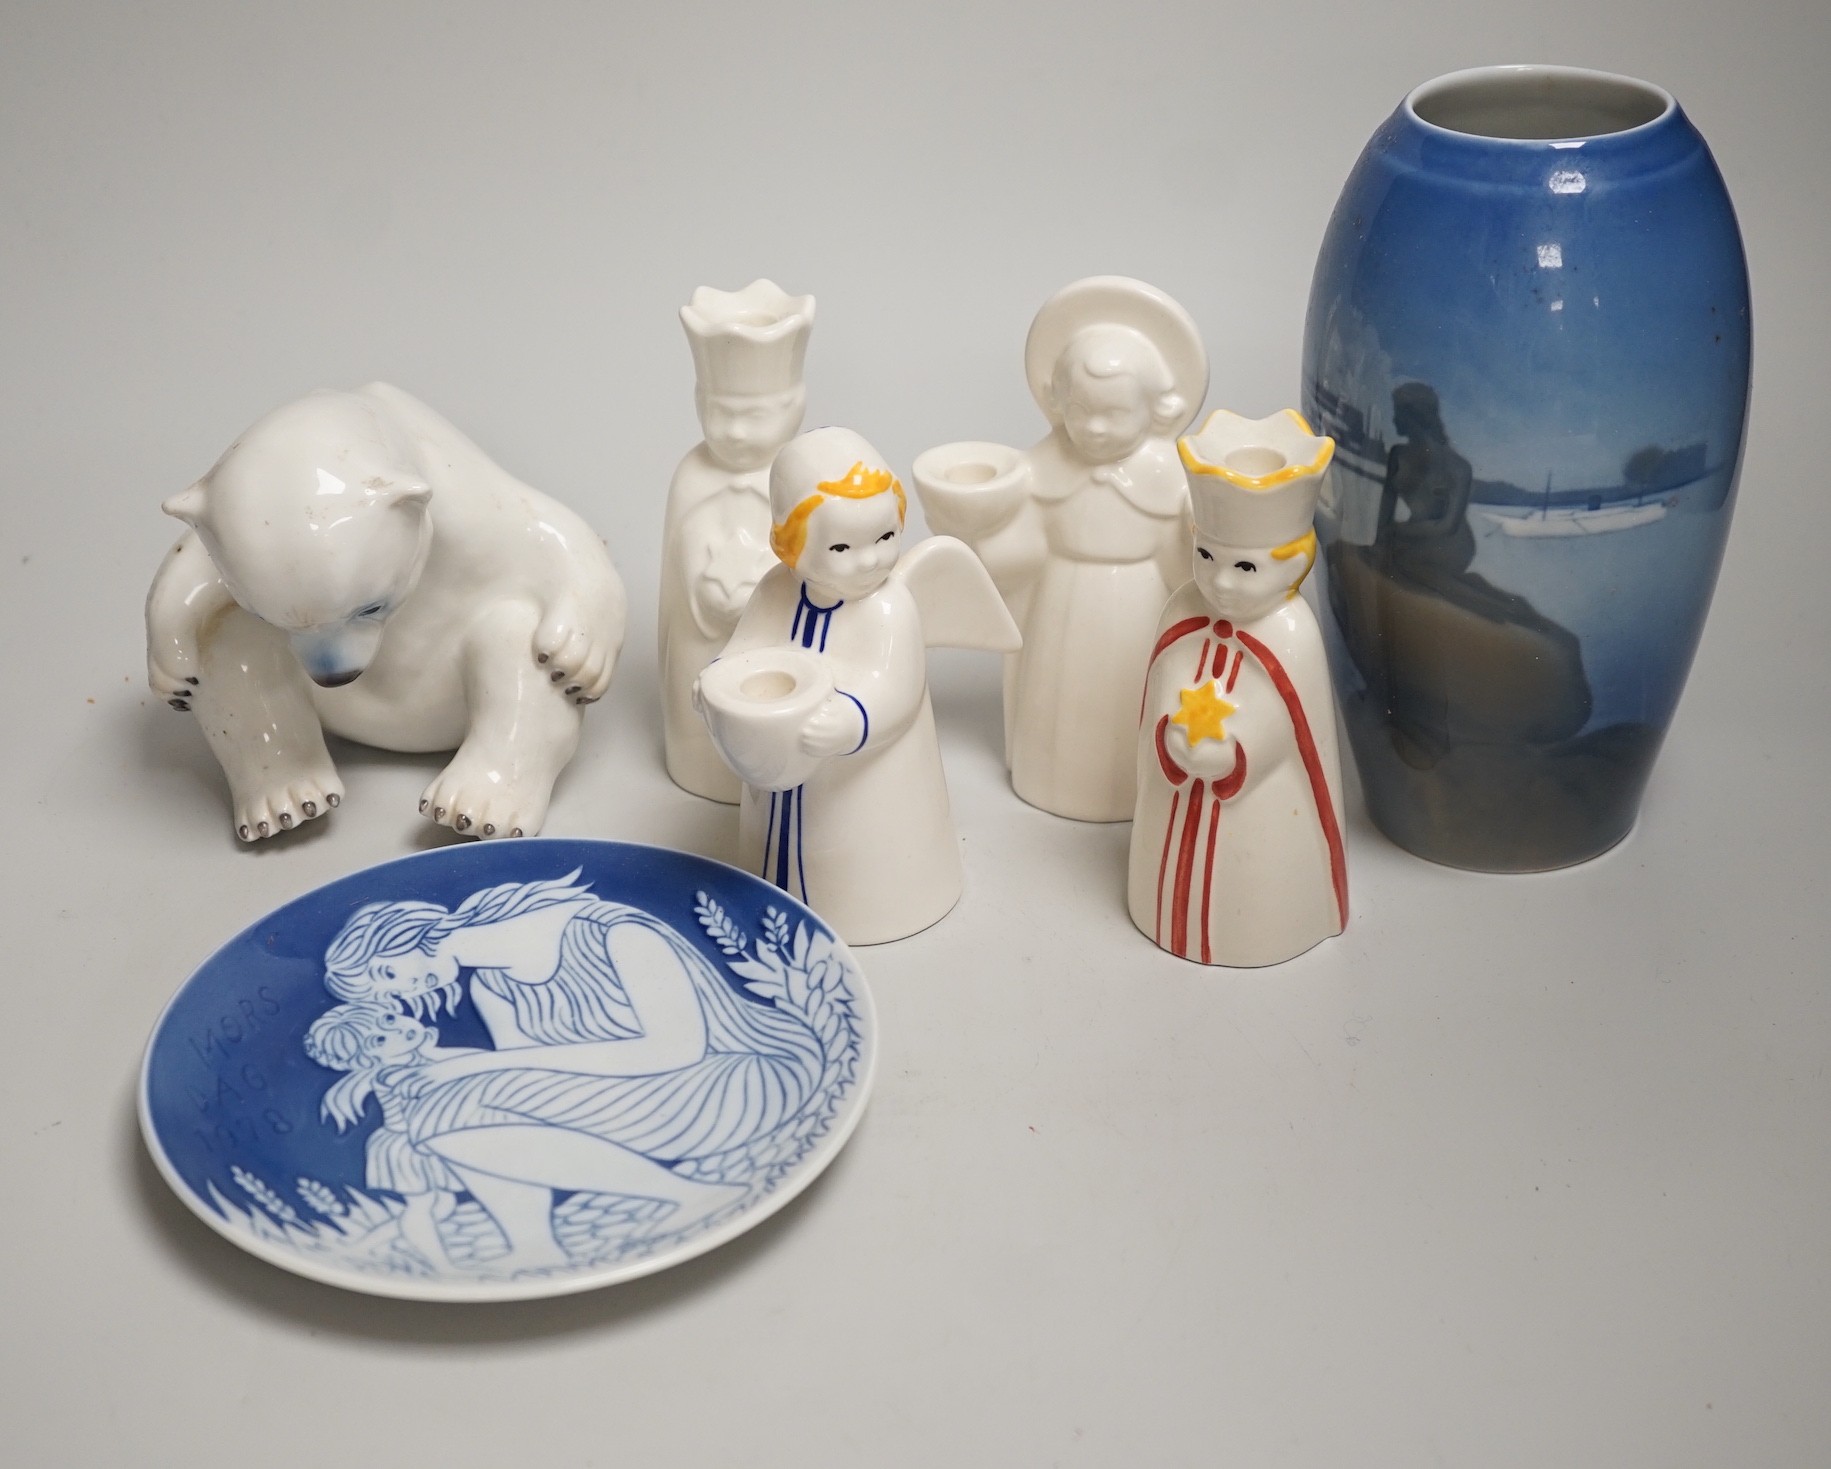 A group of Royal Copenhagen porcelain figural candle holders, a vase, the figure of a polar bear cub and a Mother’s Day dish